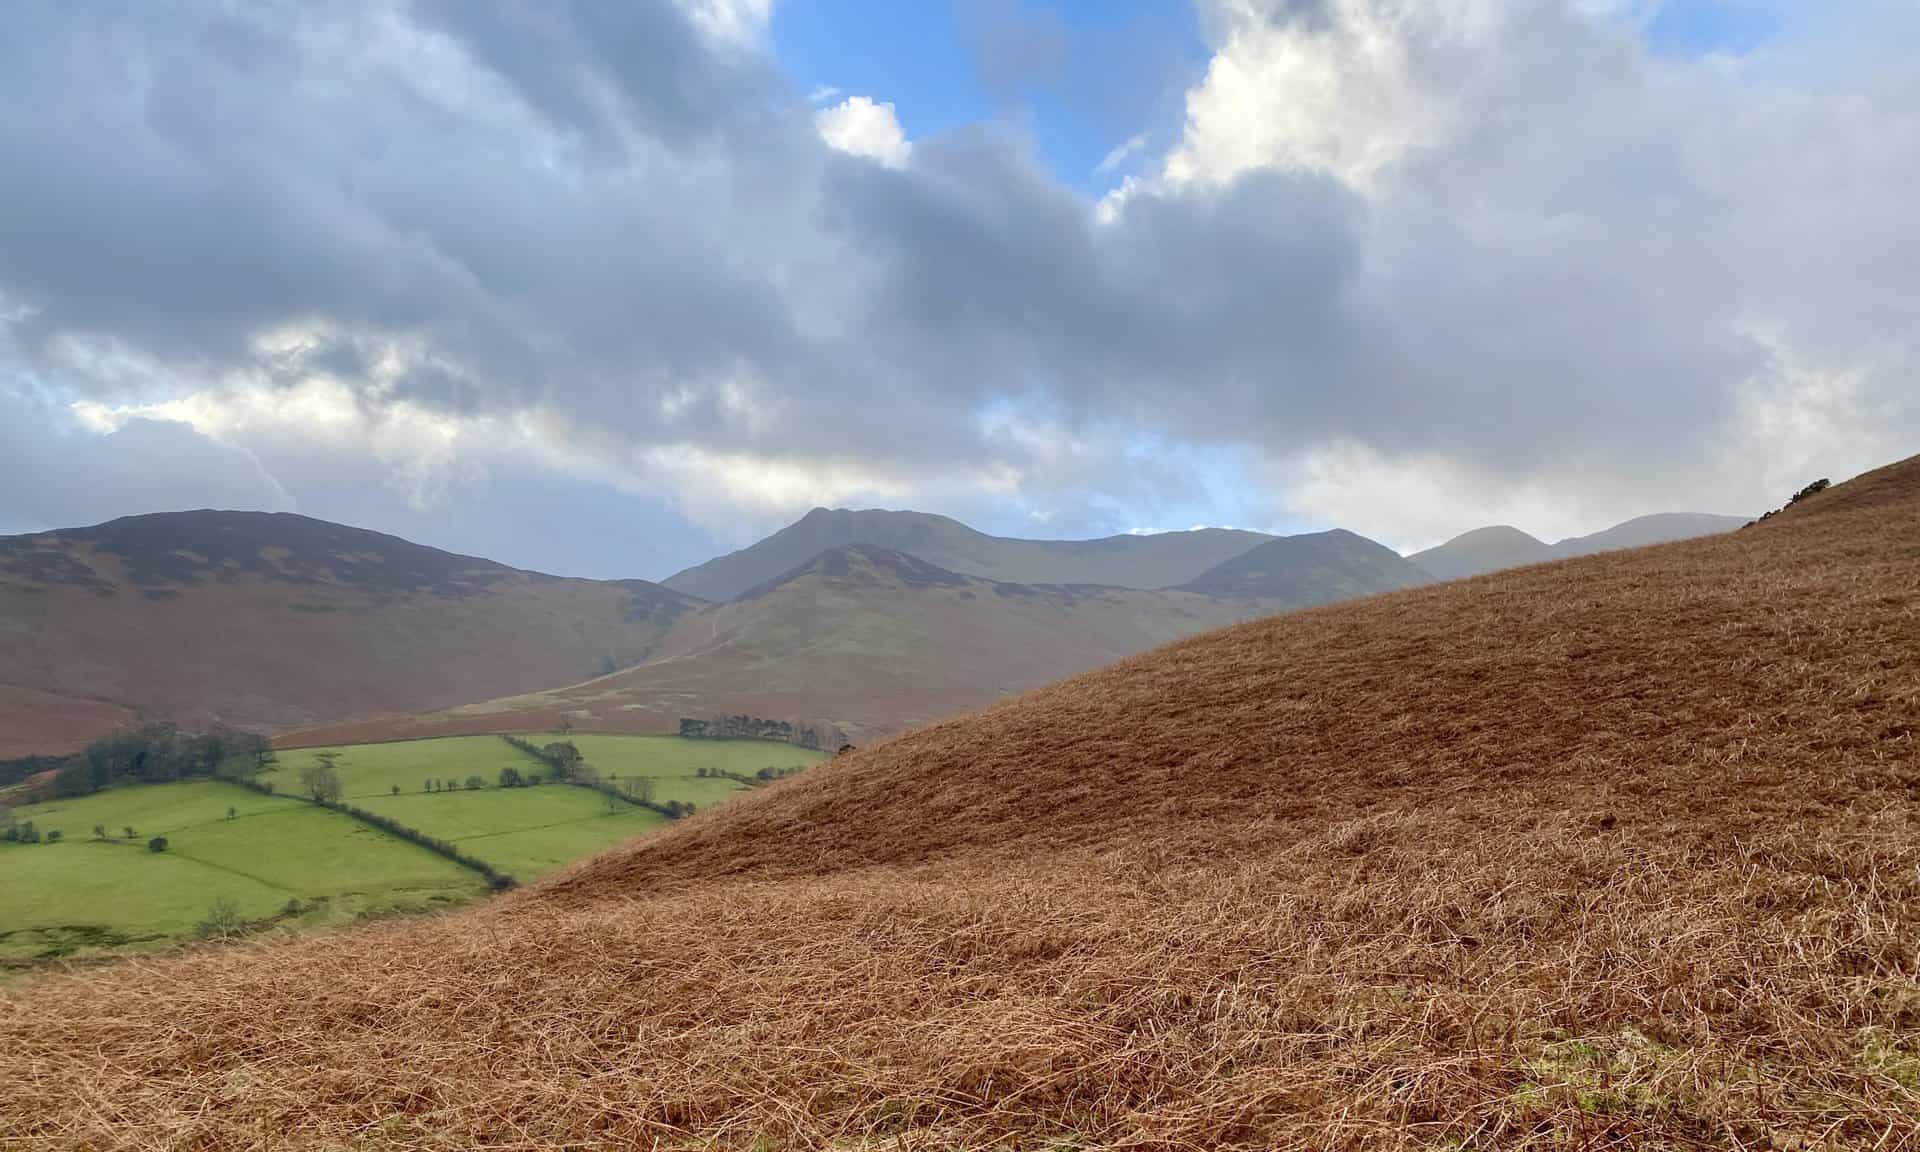 The fells on the southern side of the Coledale Beck valley. See the key below for their names.